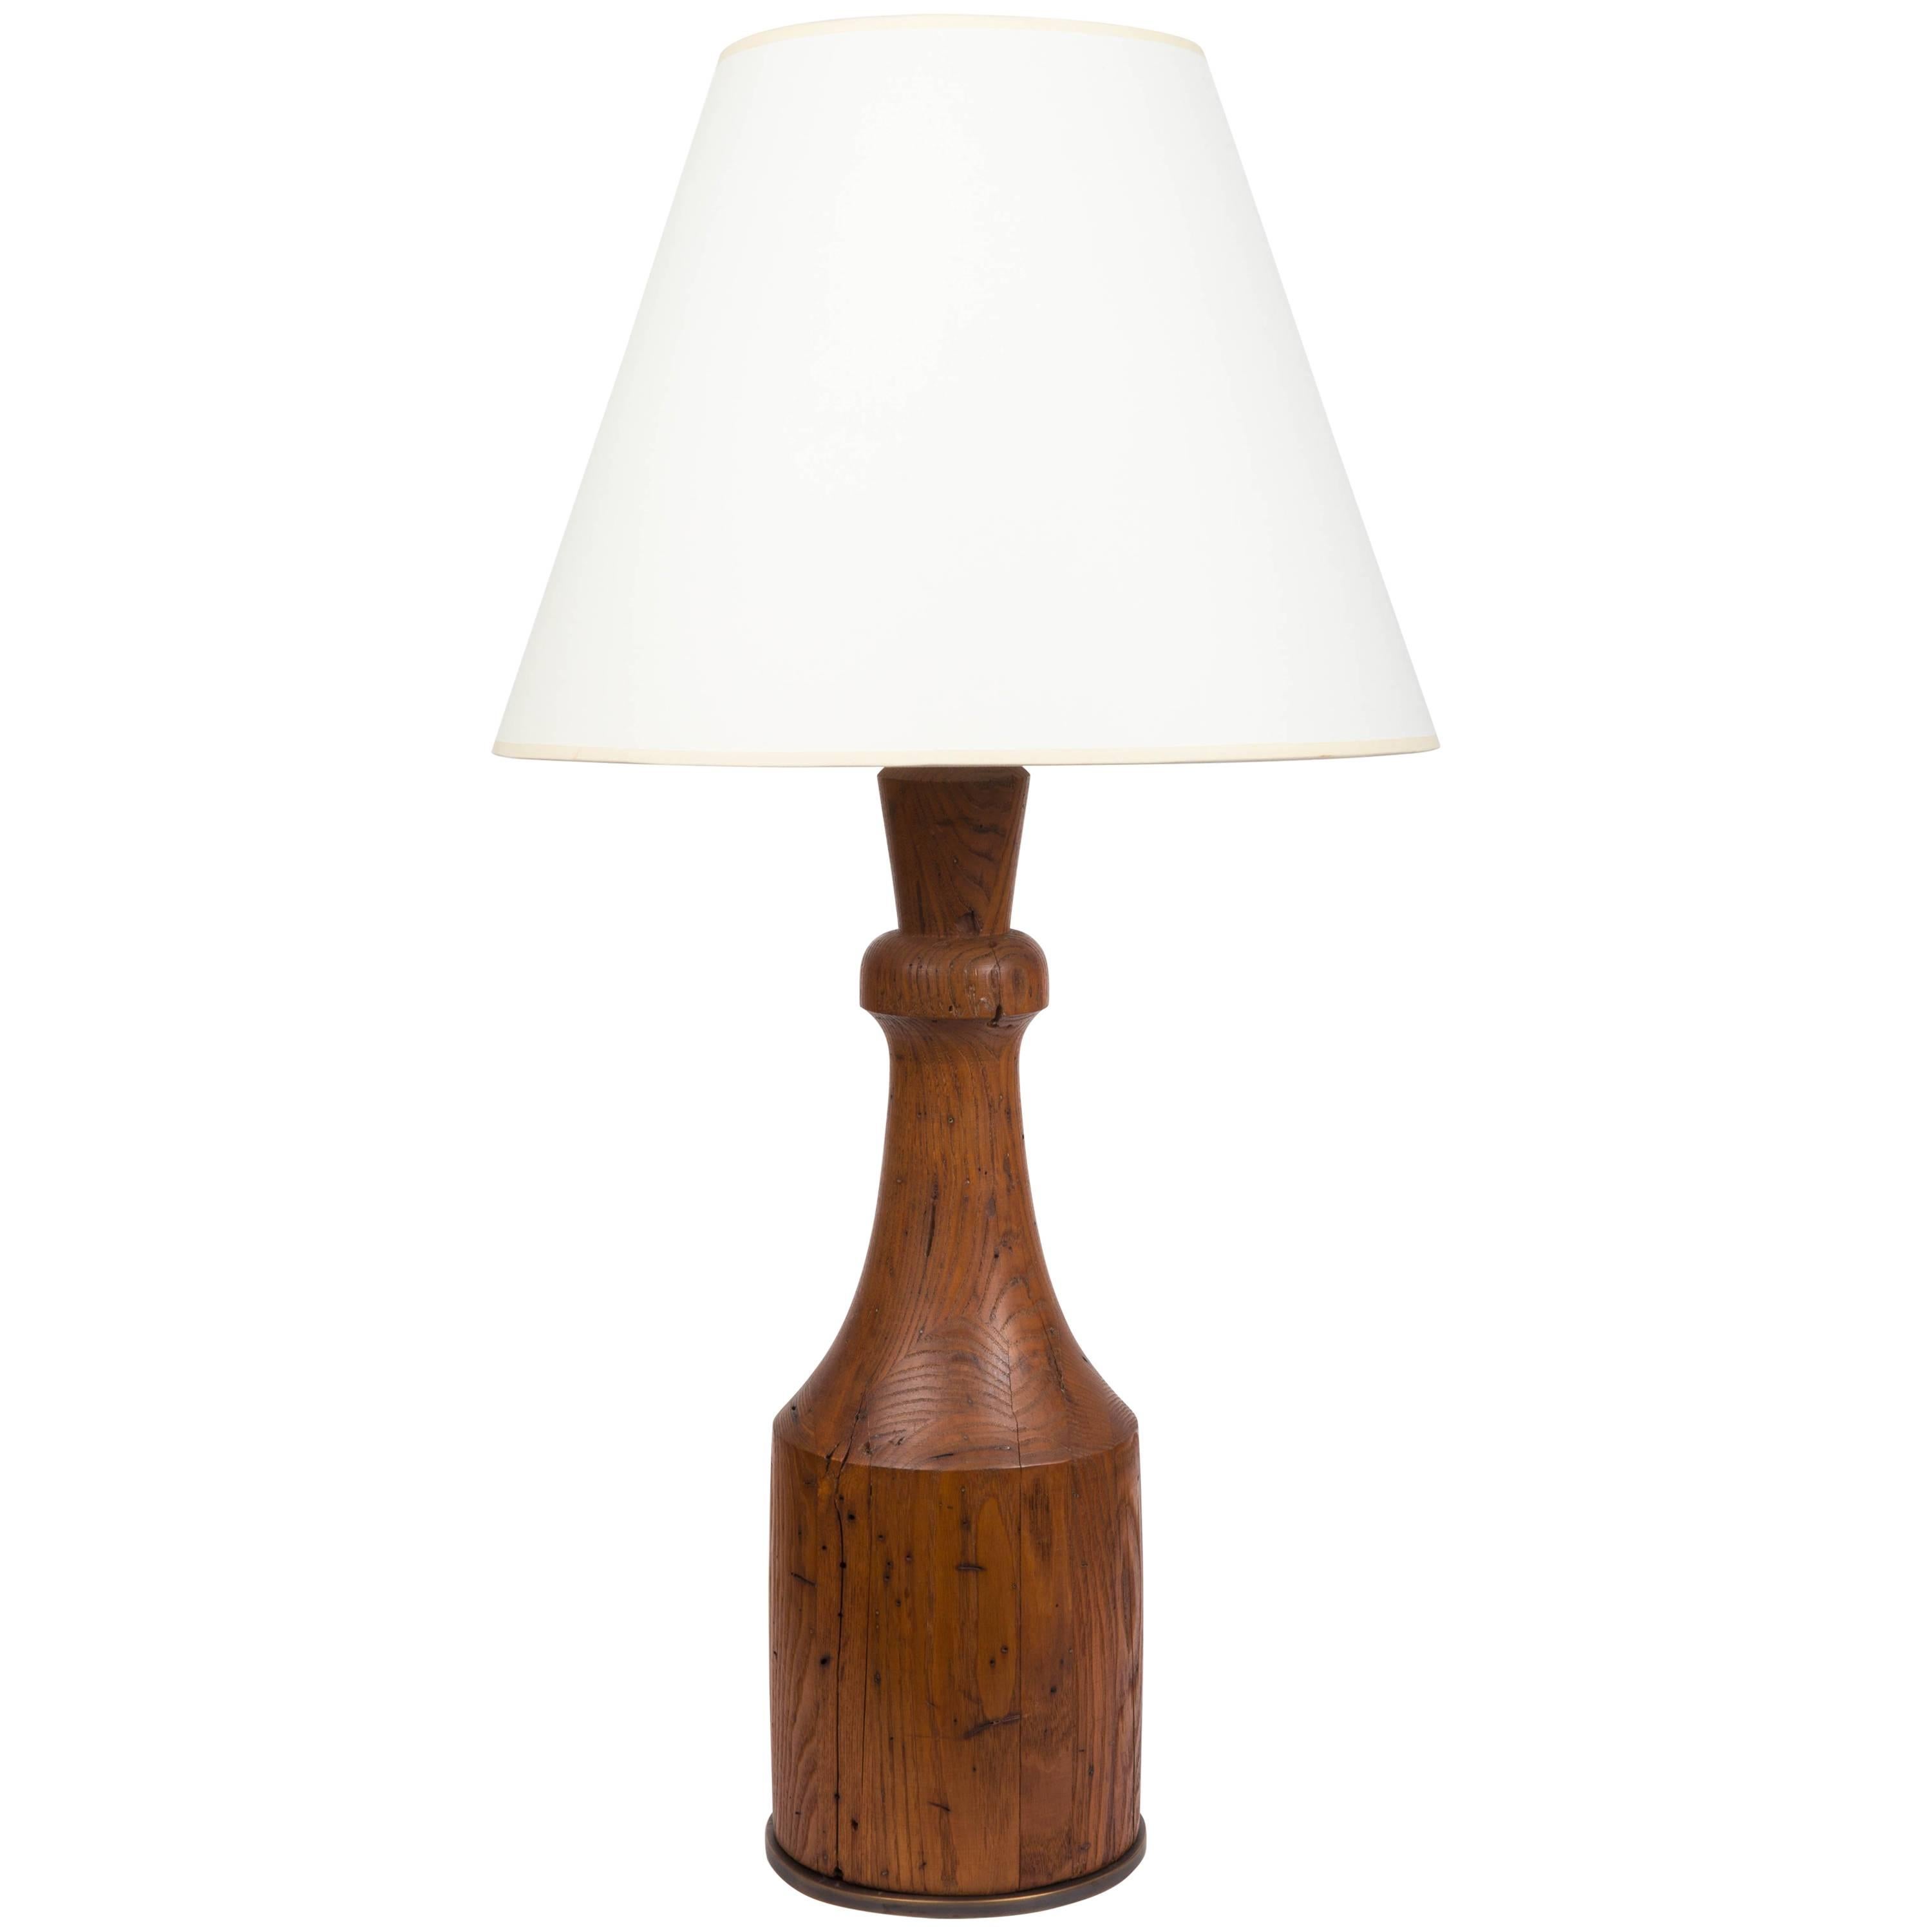 Rustic Hand-Carved Wooden Table Lamp with Bronze Base